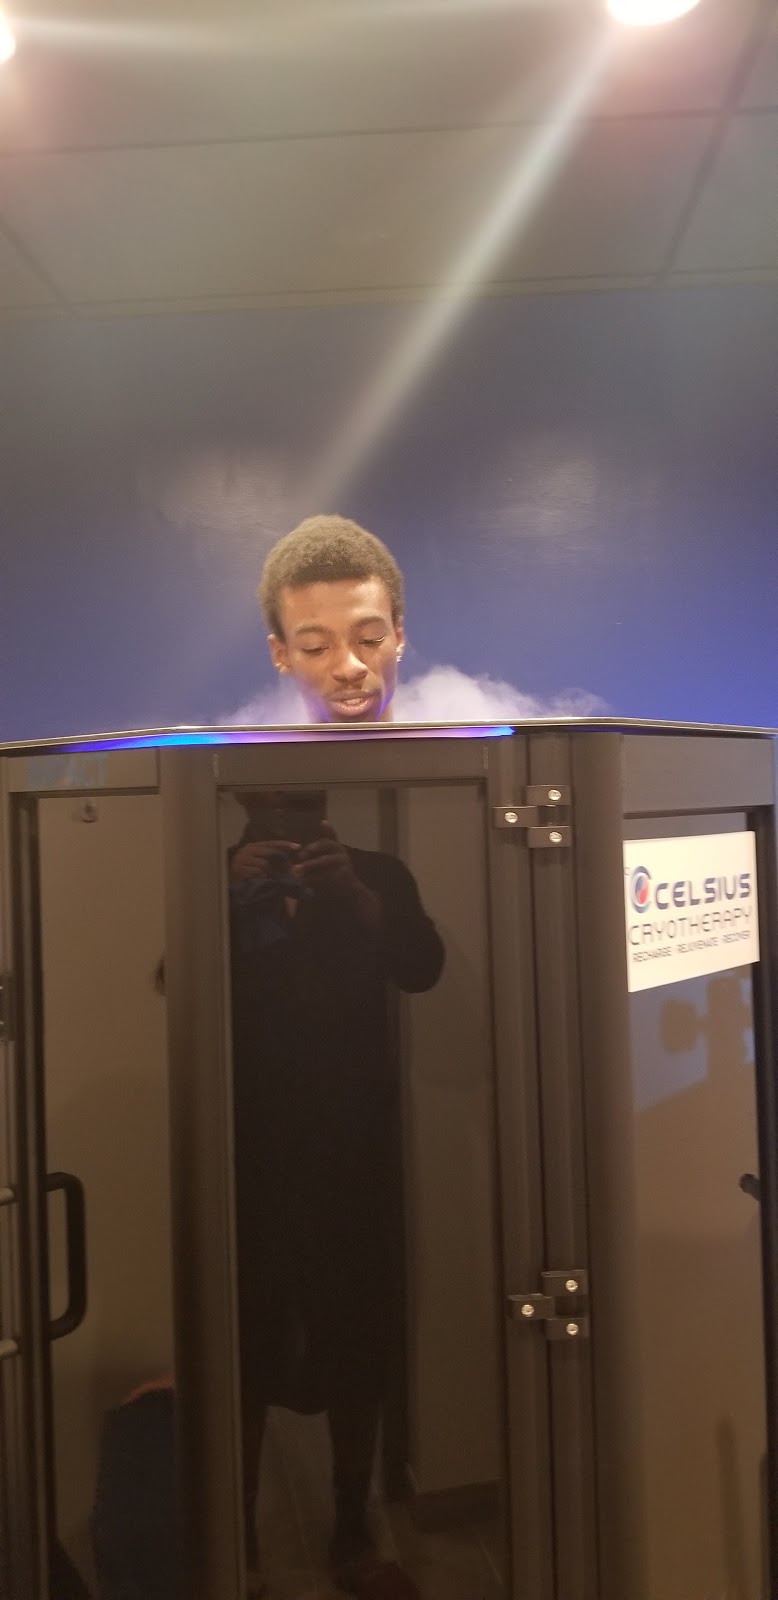 Celsius Cryotherapy STL | 8839 Ladue Rd, St. Louis, MO 63124 | Phone: (314) 279-9900